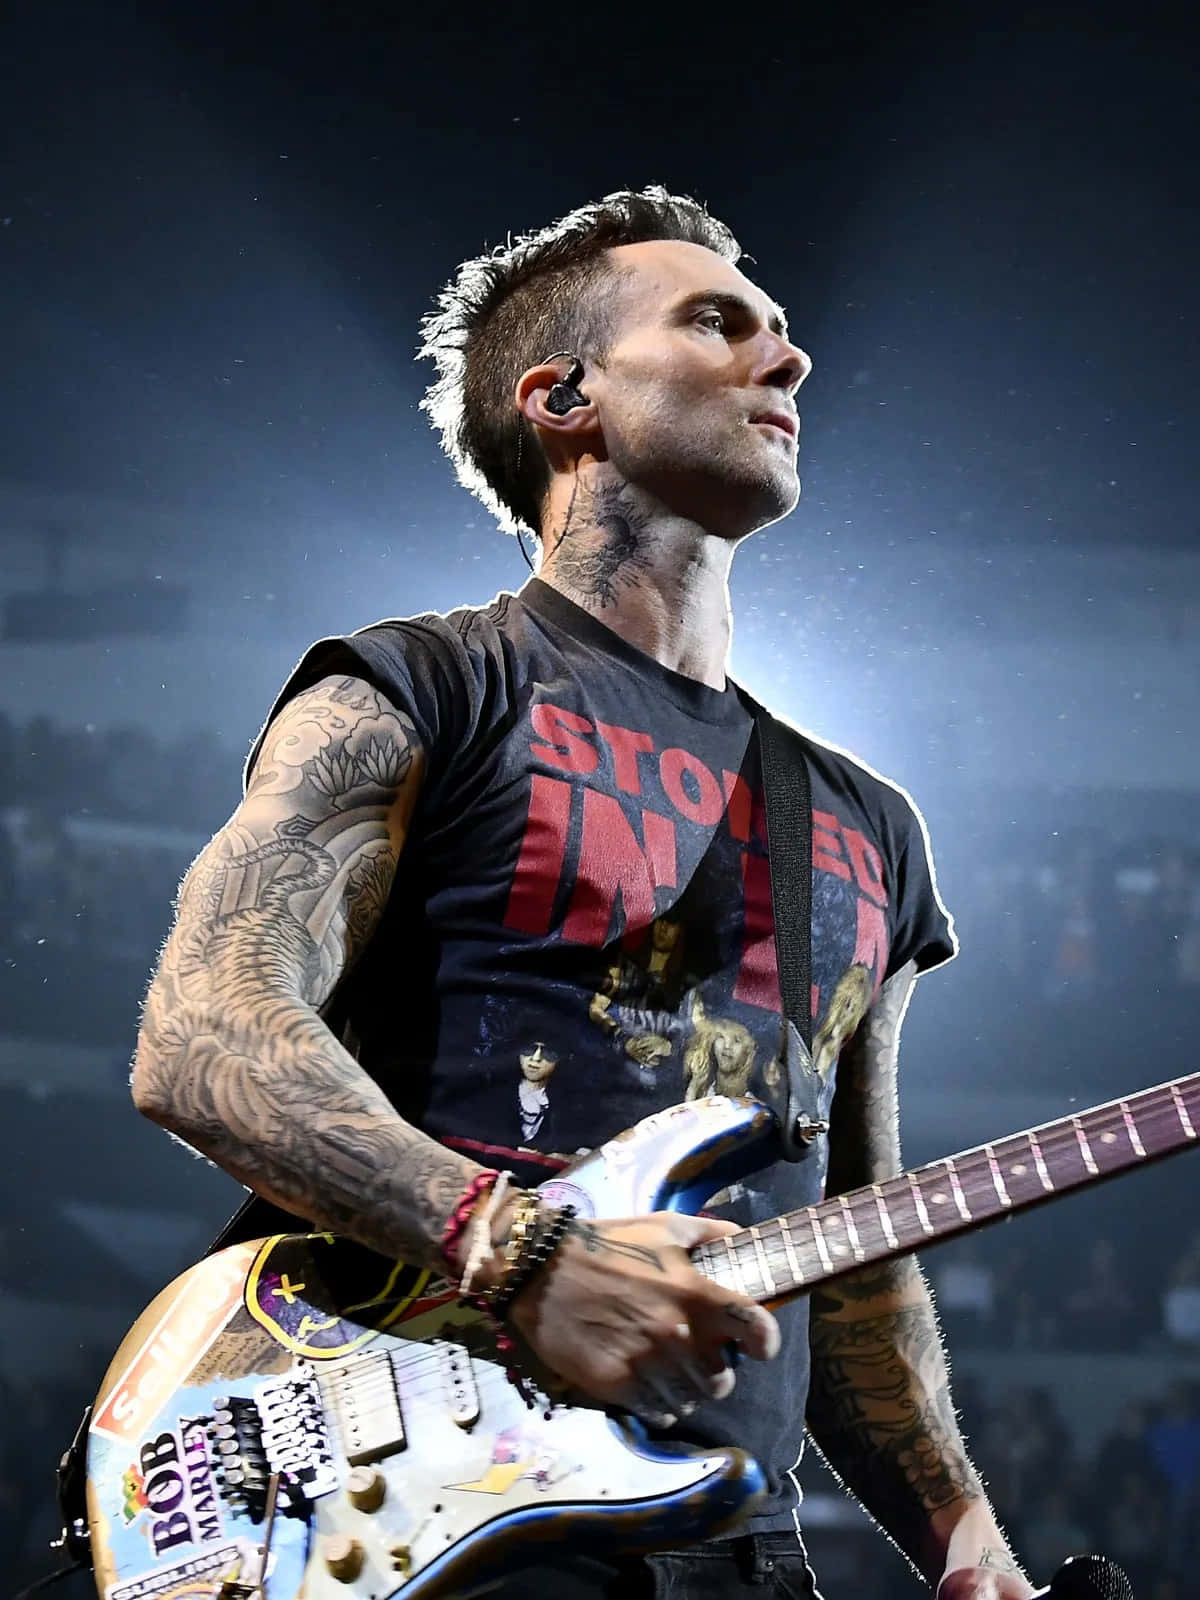 Adam Levine taking a break from performing.